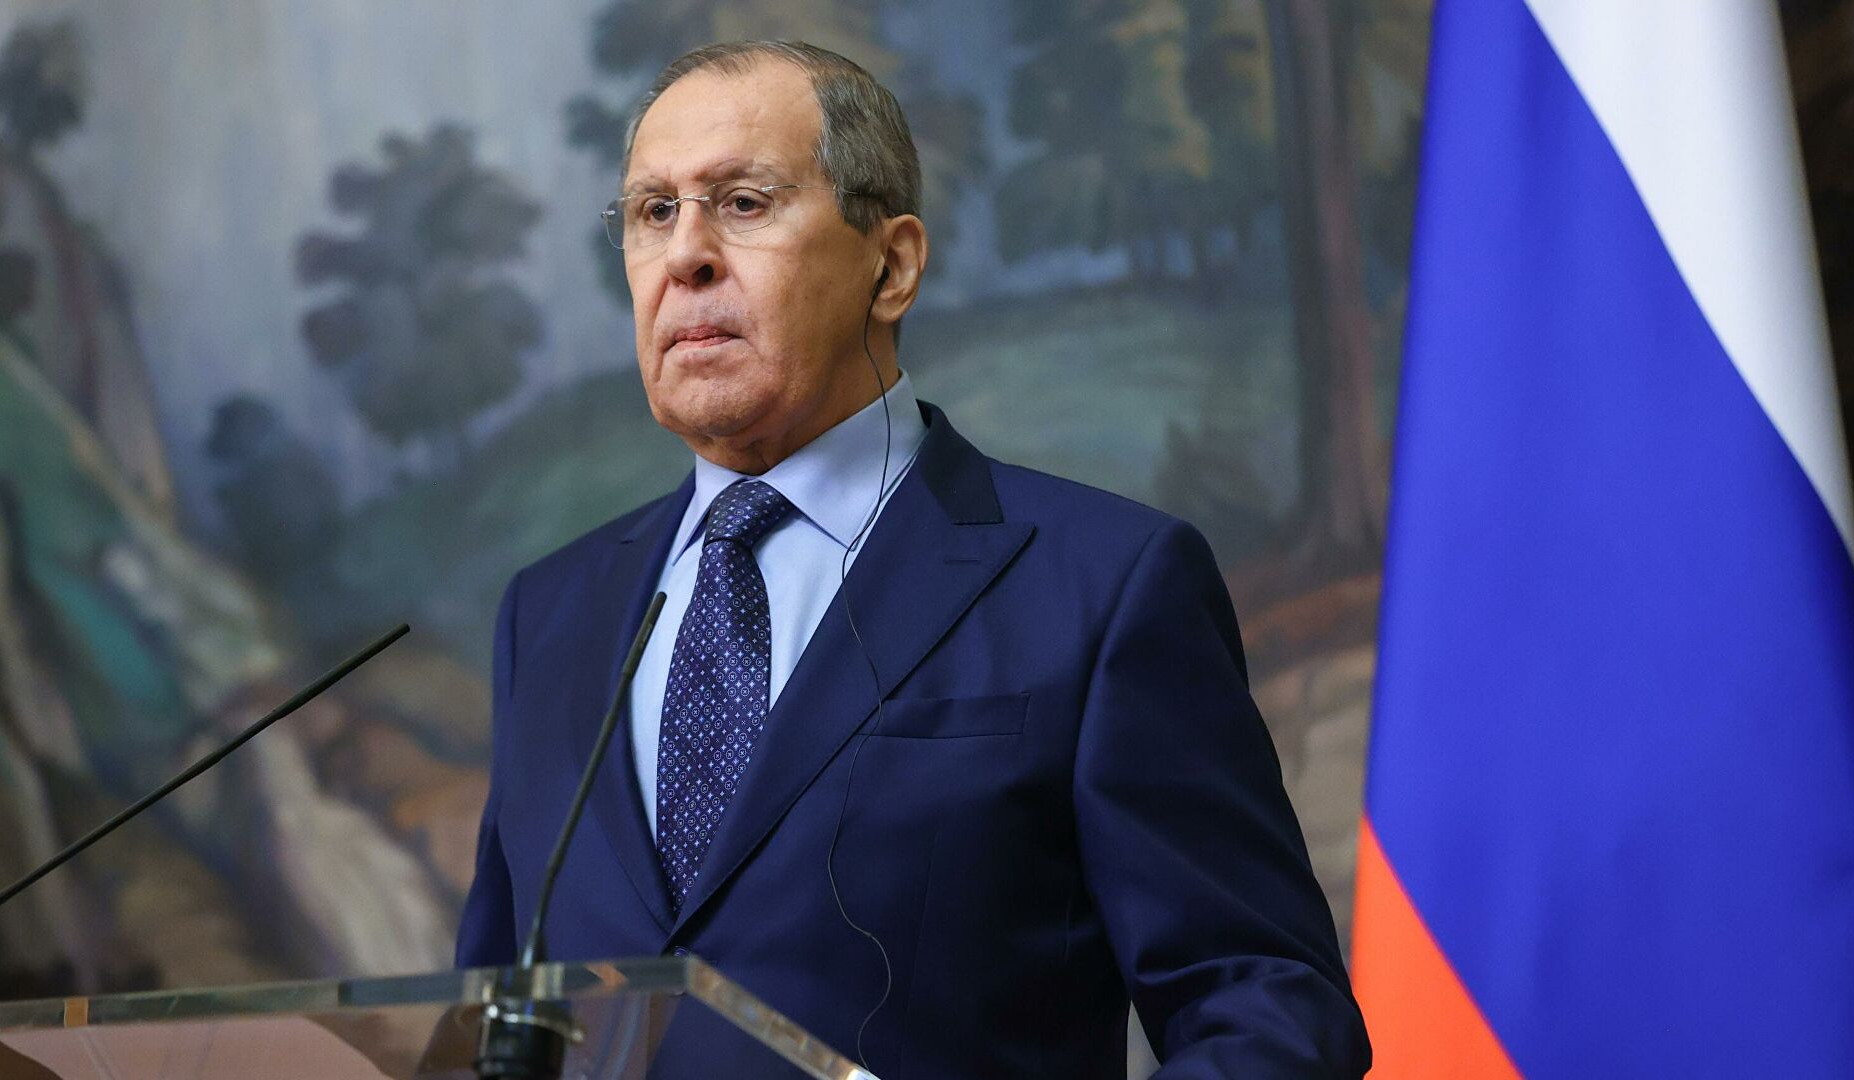 Lavrov stressed key role of Russia in solving controversial issues of Armenia and Azerbaijan